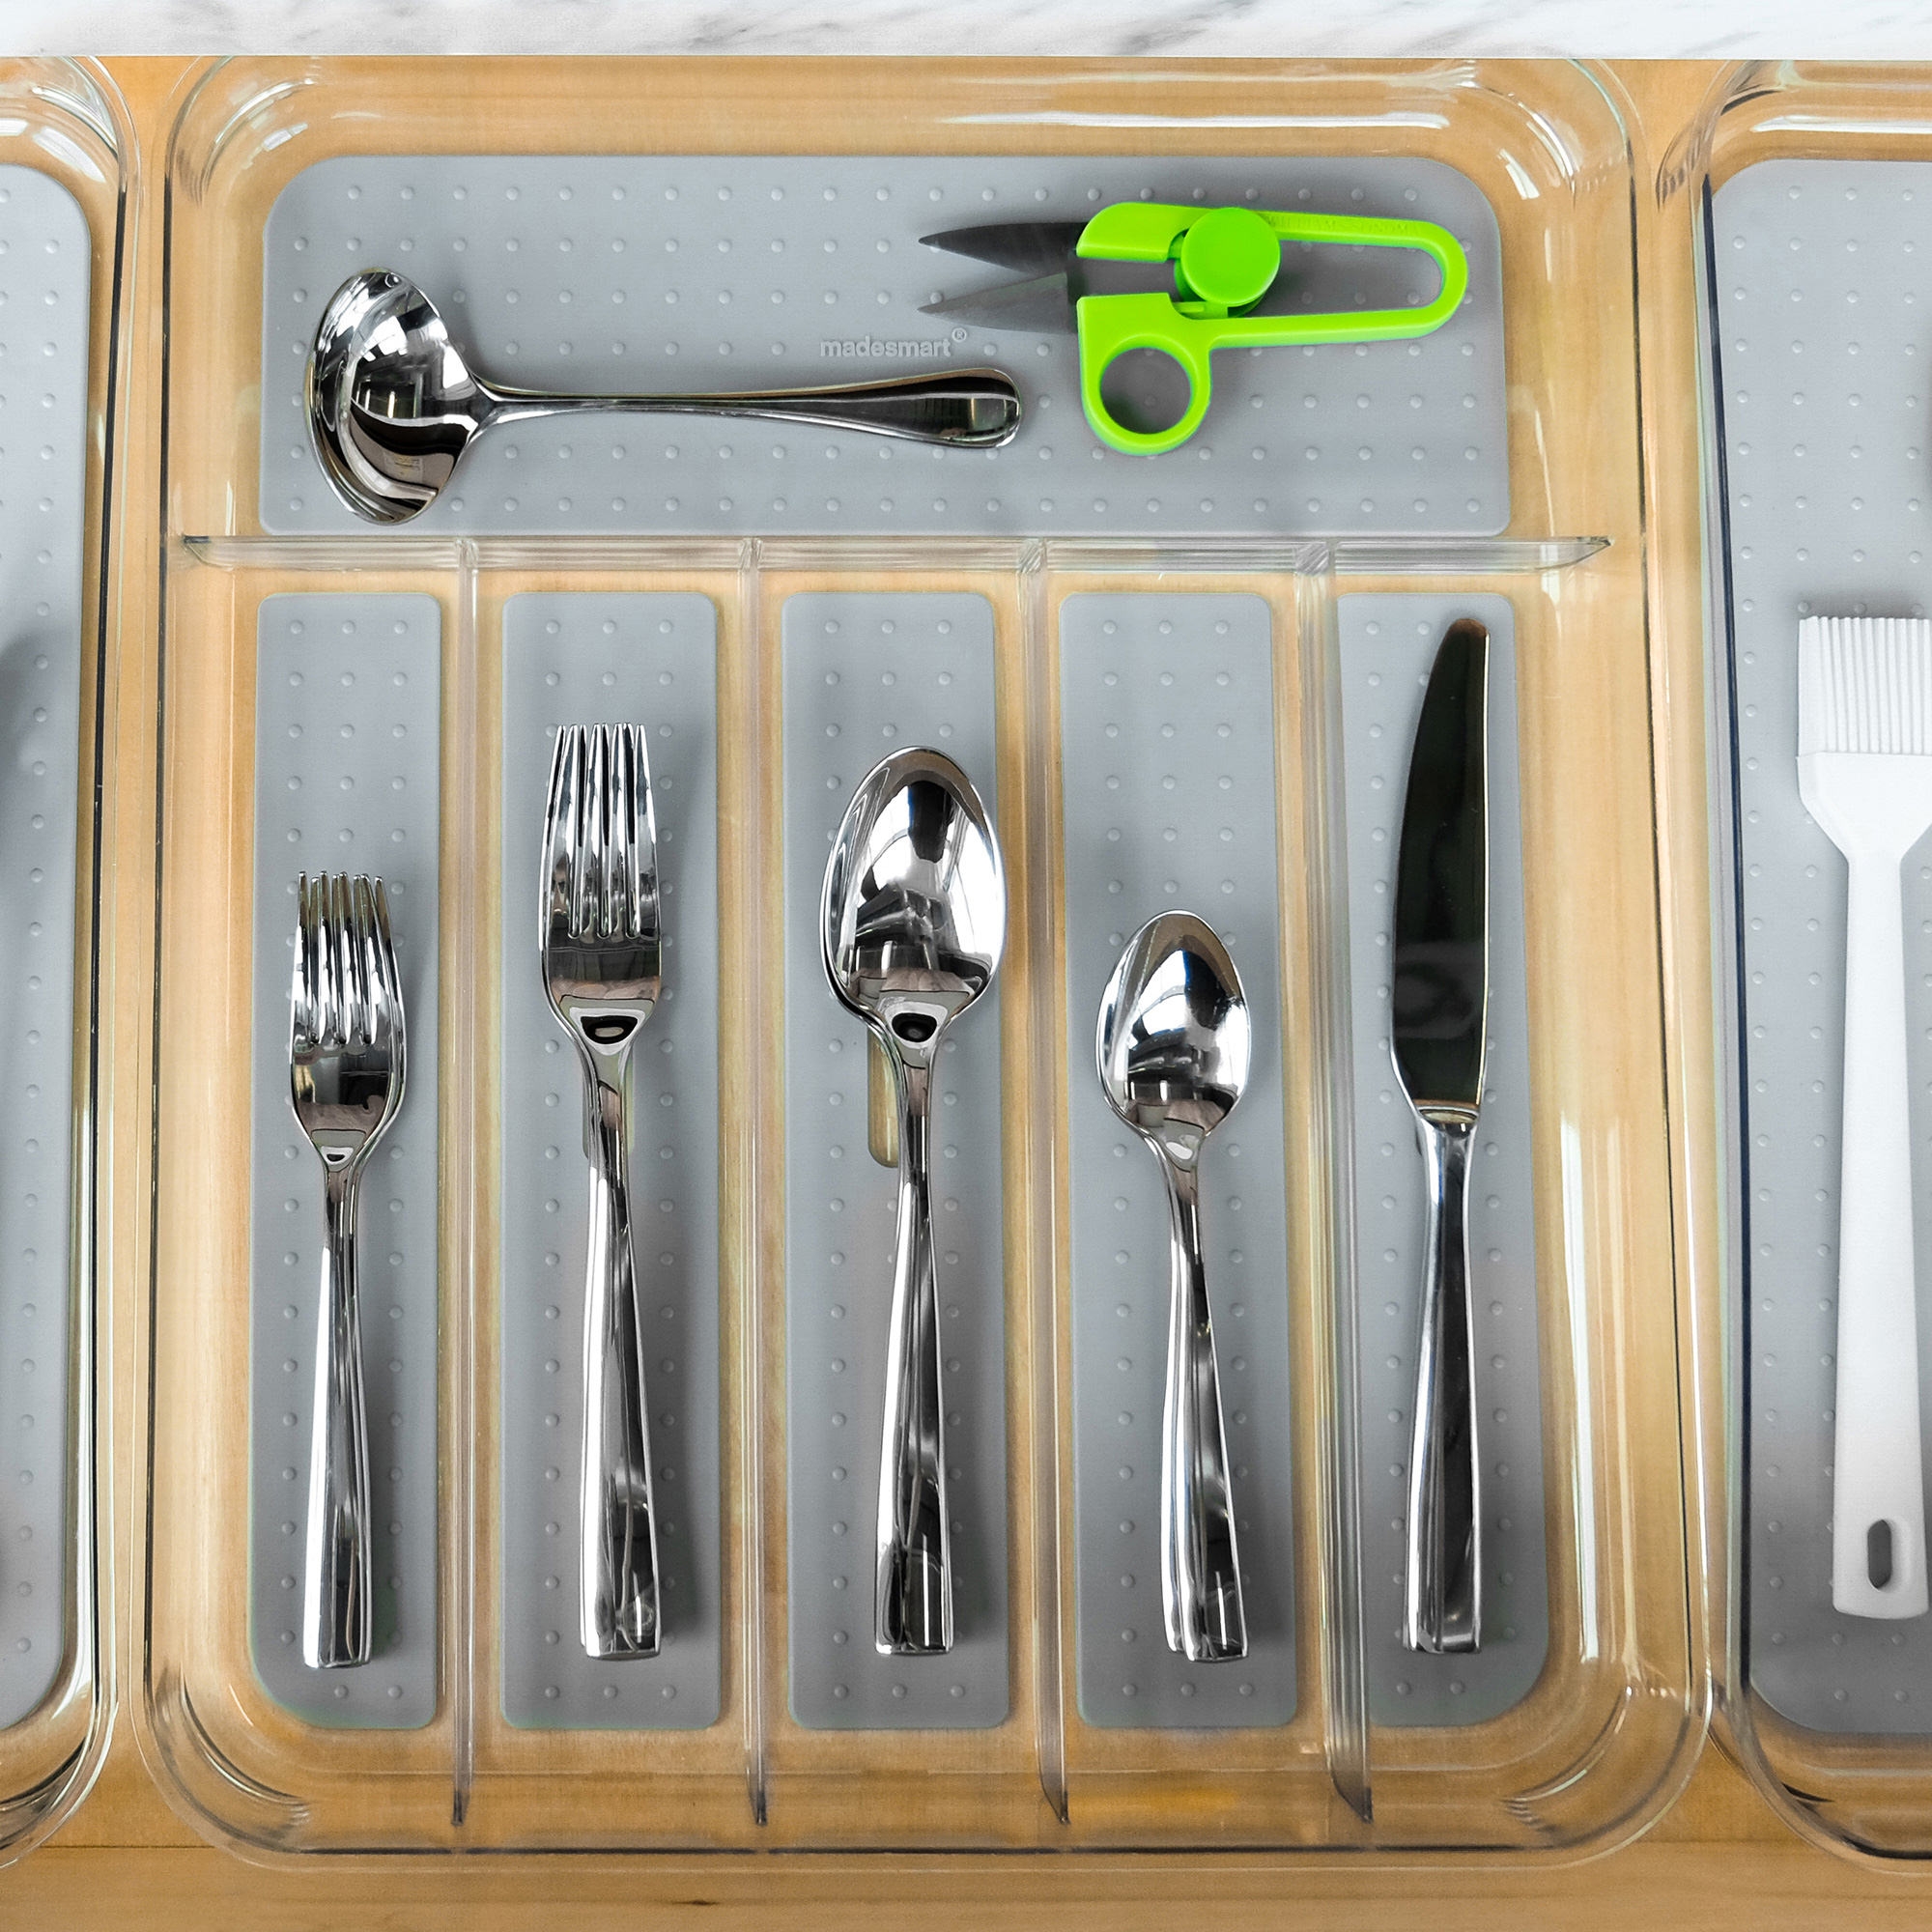 Madesmart Soft Grip Cutlery Tray 6 Compartment Clear Image 2